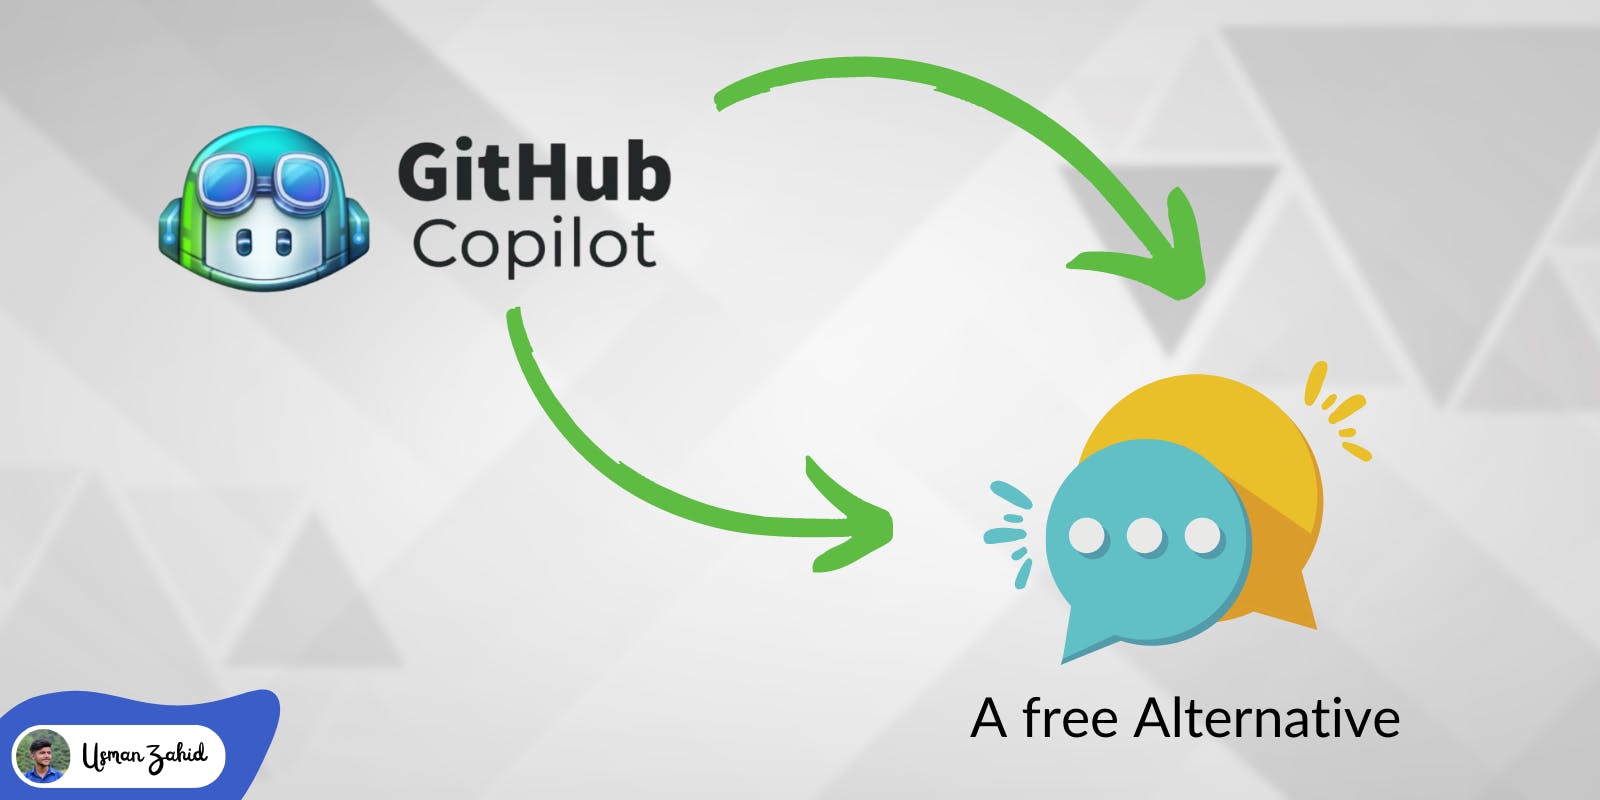 You don't need to pay for Github Copilot, here's why